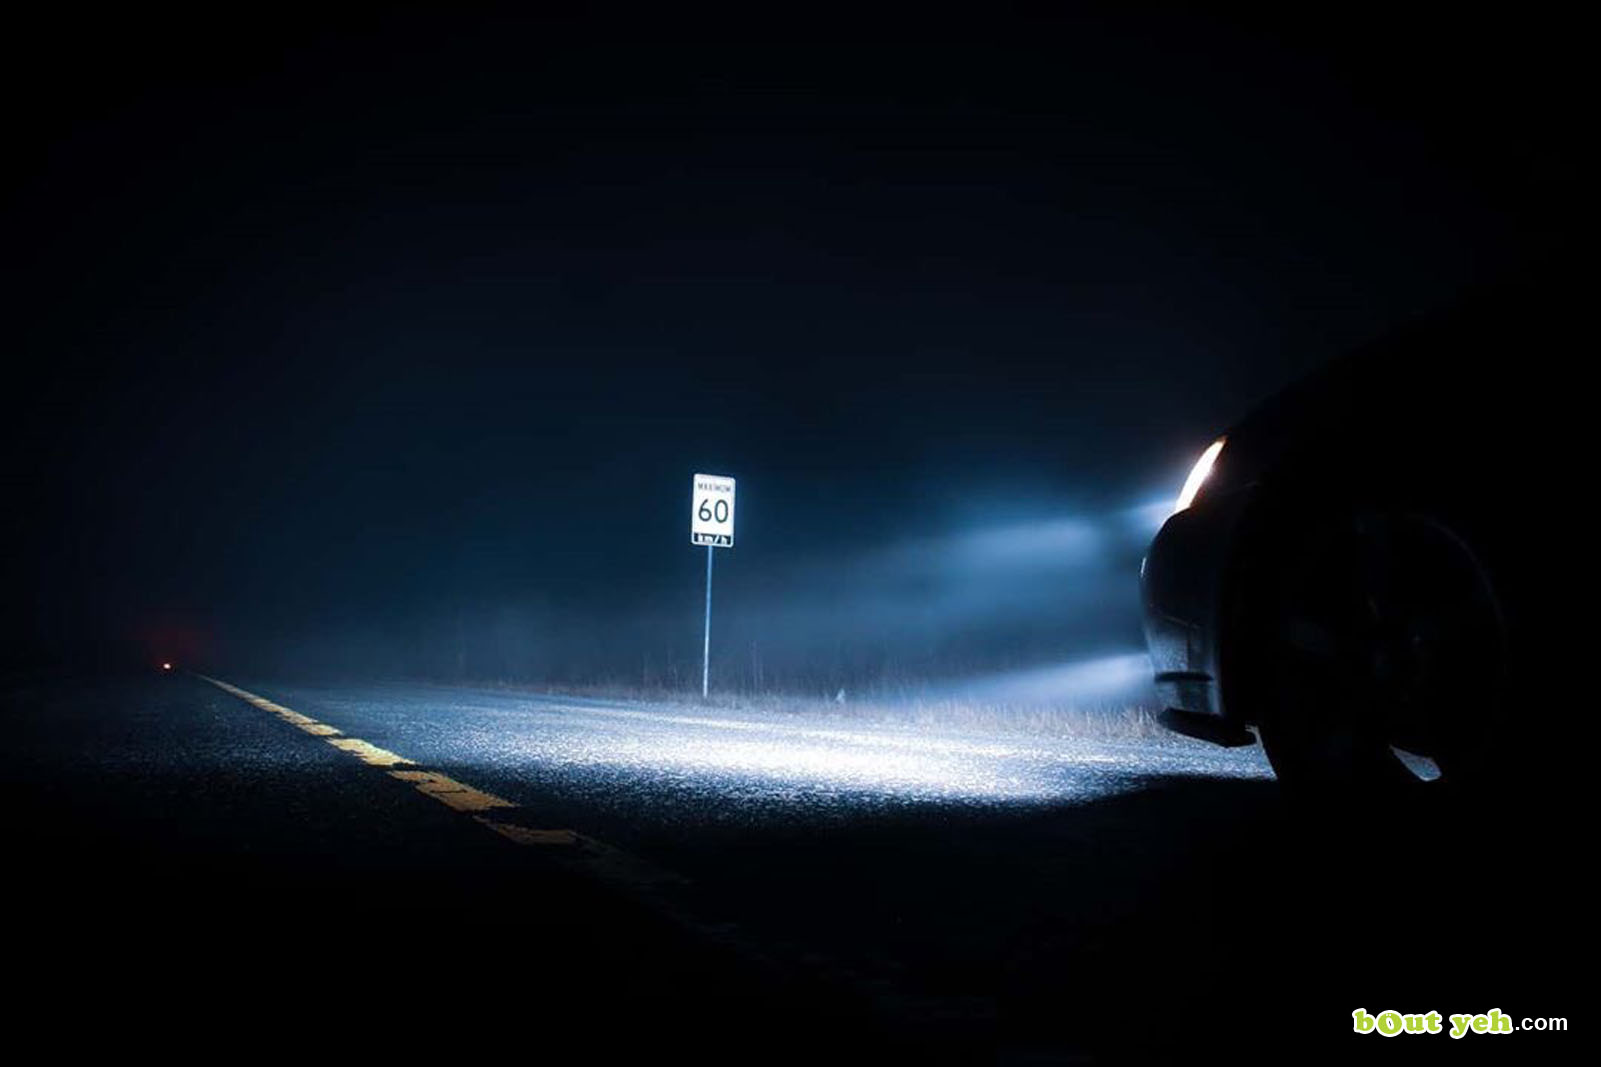 Photograph of road speed sign in car headlights at night by Robert McLaughlin - photo 5895 shared by Bout Yeh photographers Belfast